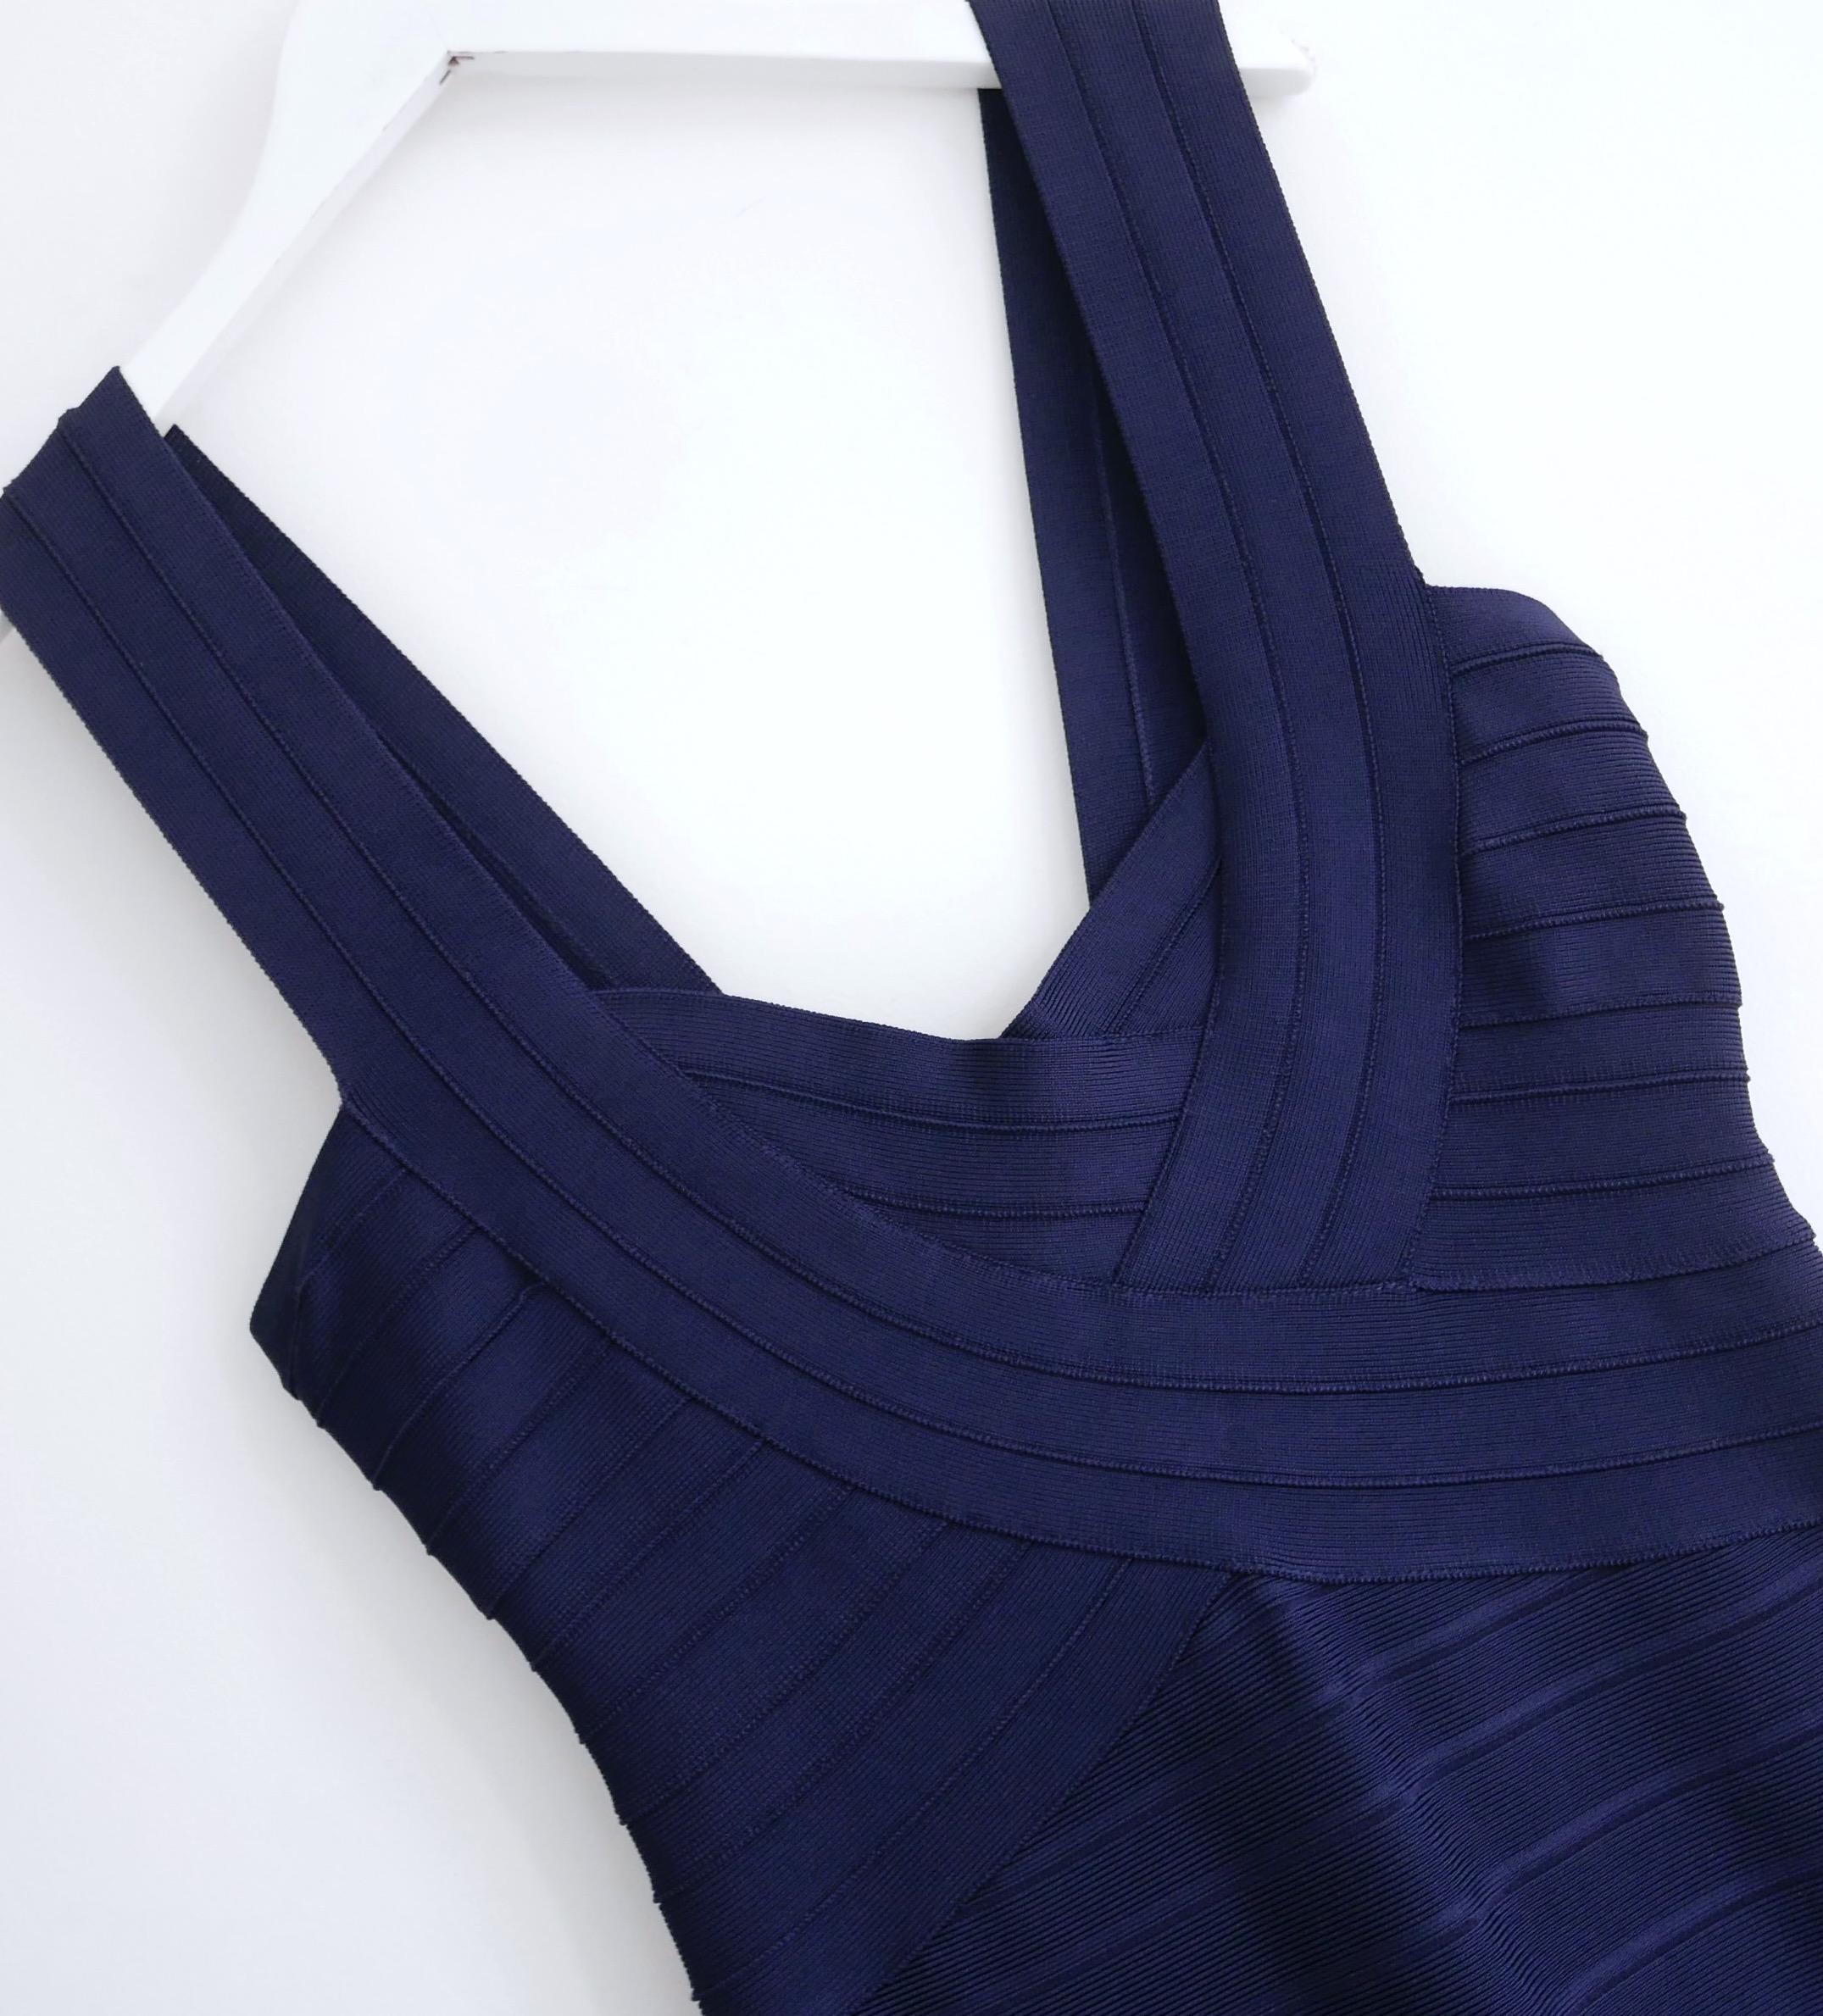 Super flirty Herve Leger Elisha dress - bought for £1150 and unworn. Made from Leger's signature super stretchy, thick 'cinch you in' rayon mix in classic navy blue. It has super flattering fit and flare bandage construction with cross over